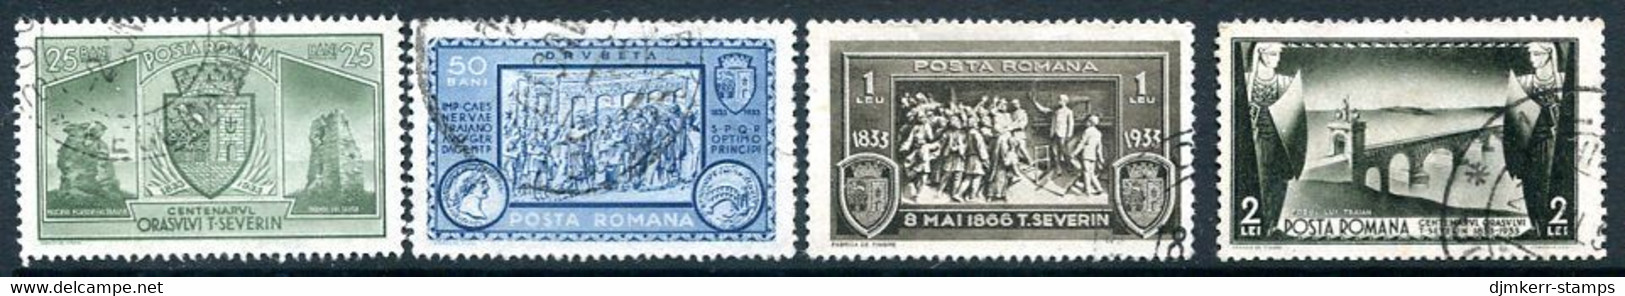 ROMANIA 1933 Centenary Of Severin Used.  Michel 458-61 - Used Stamps